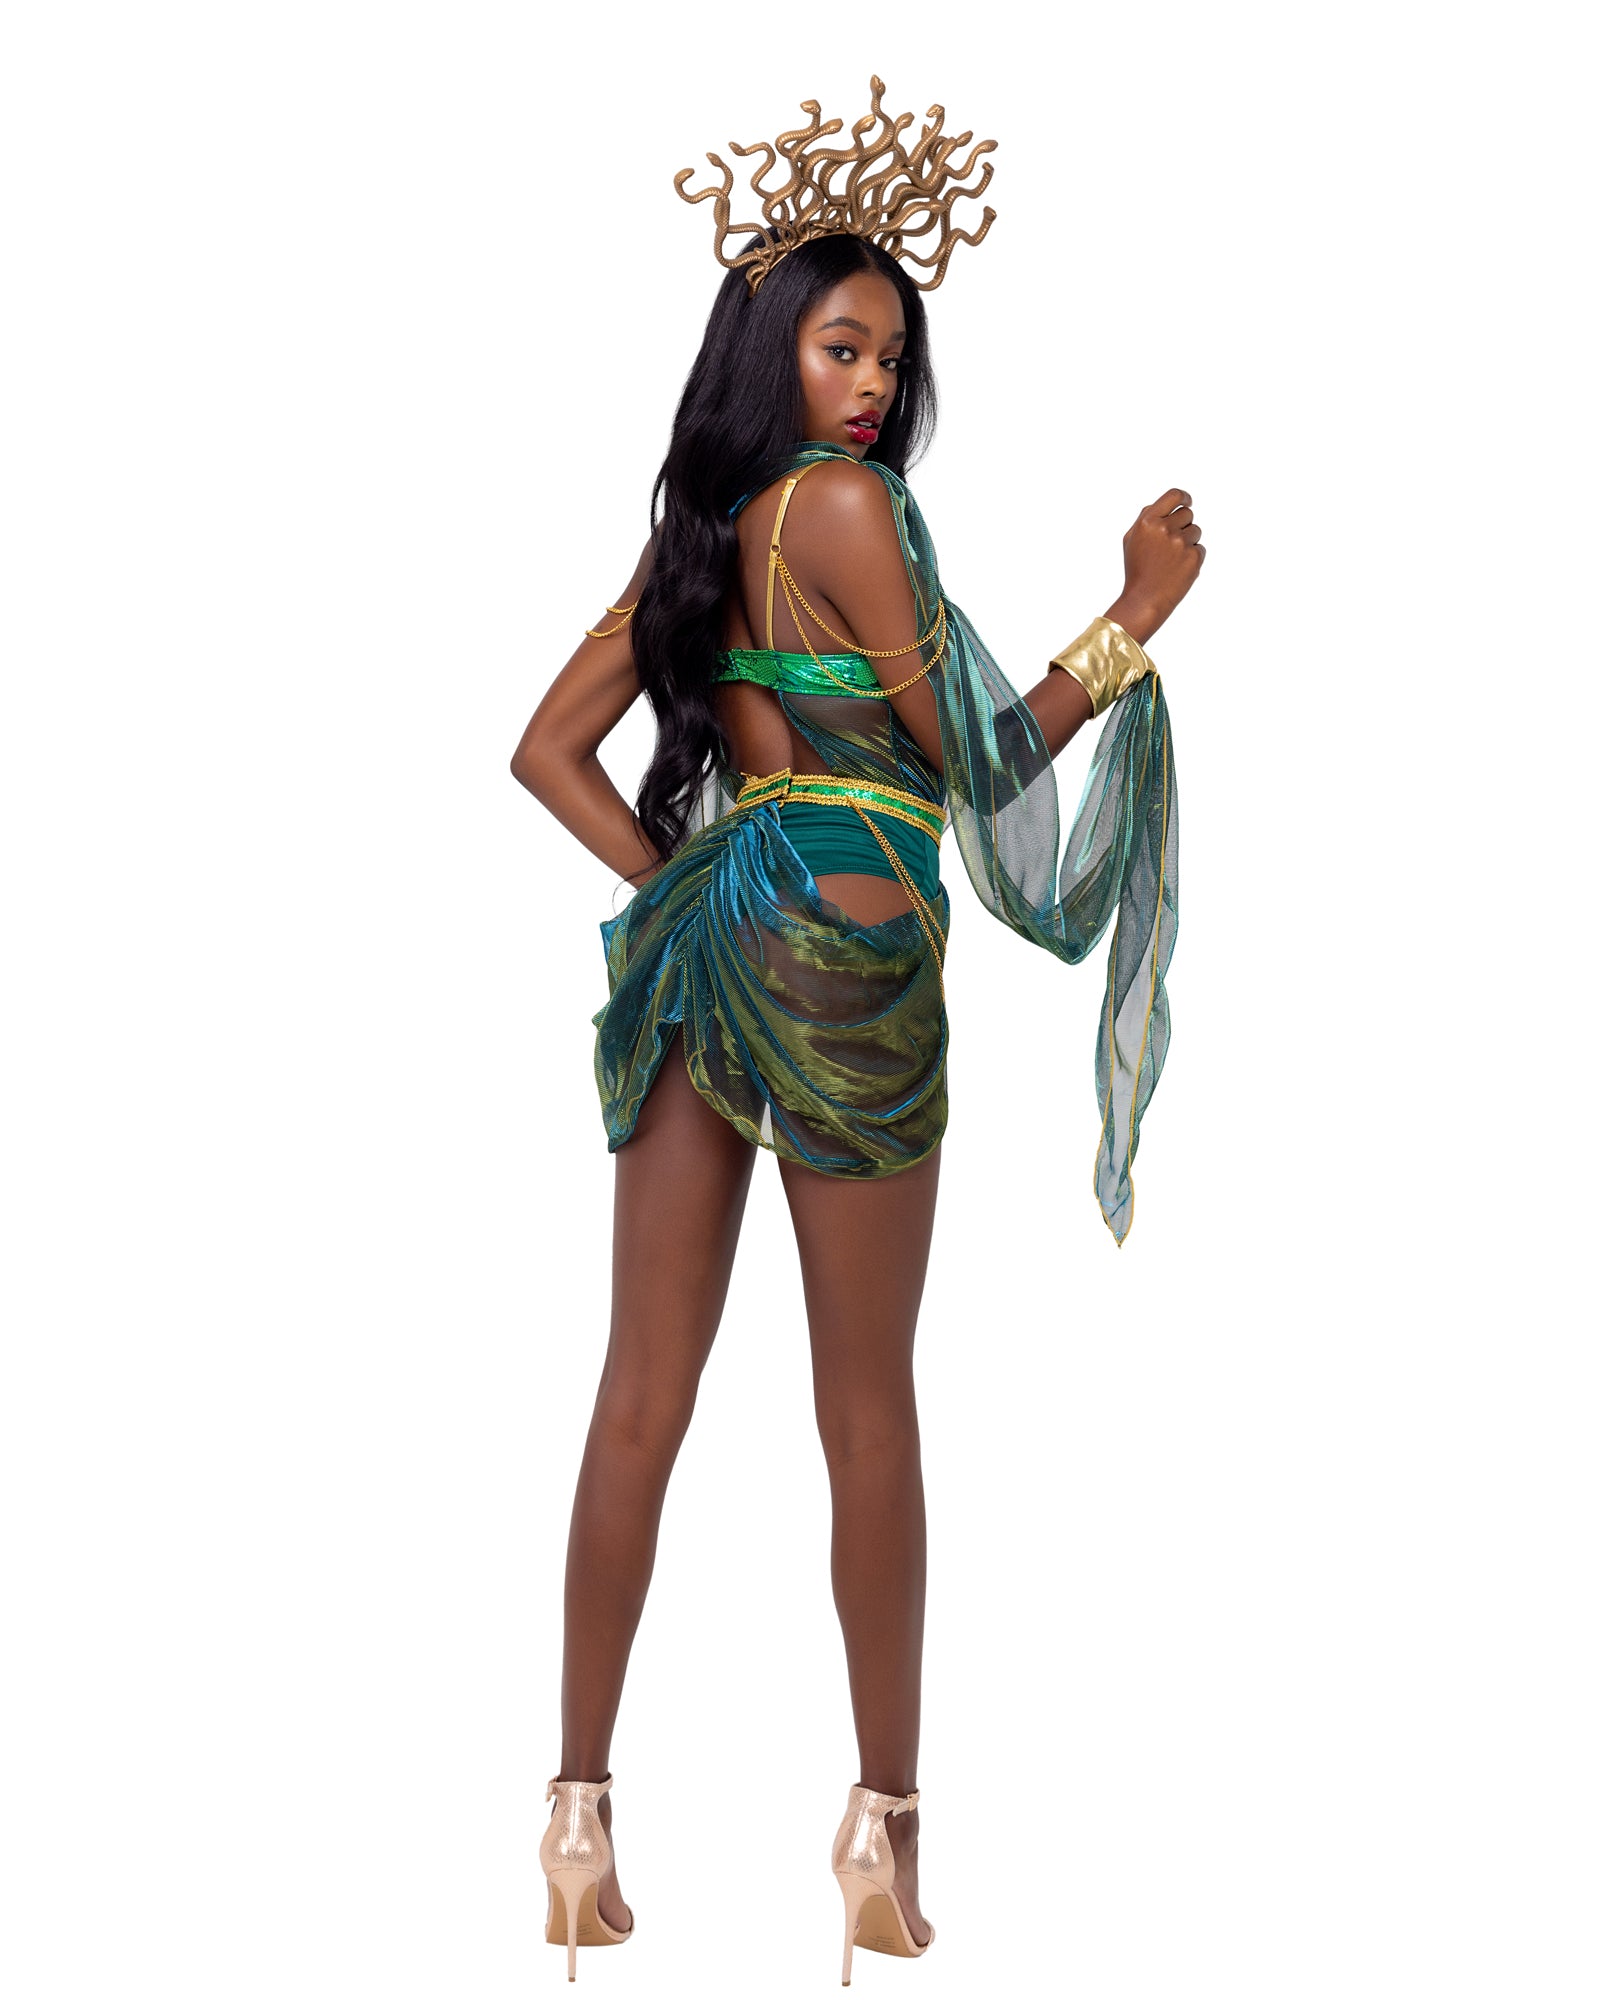 Sultry Medusa Costume by ROMA in Size S, M, or L